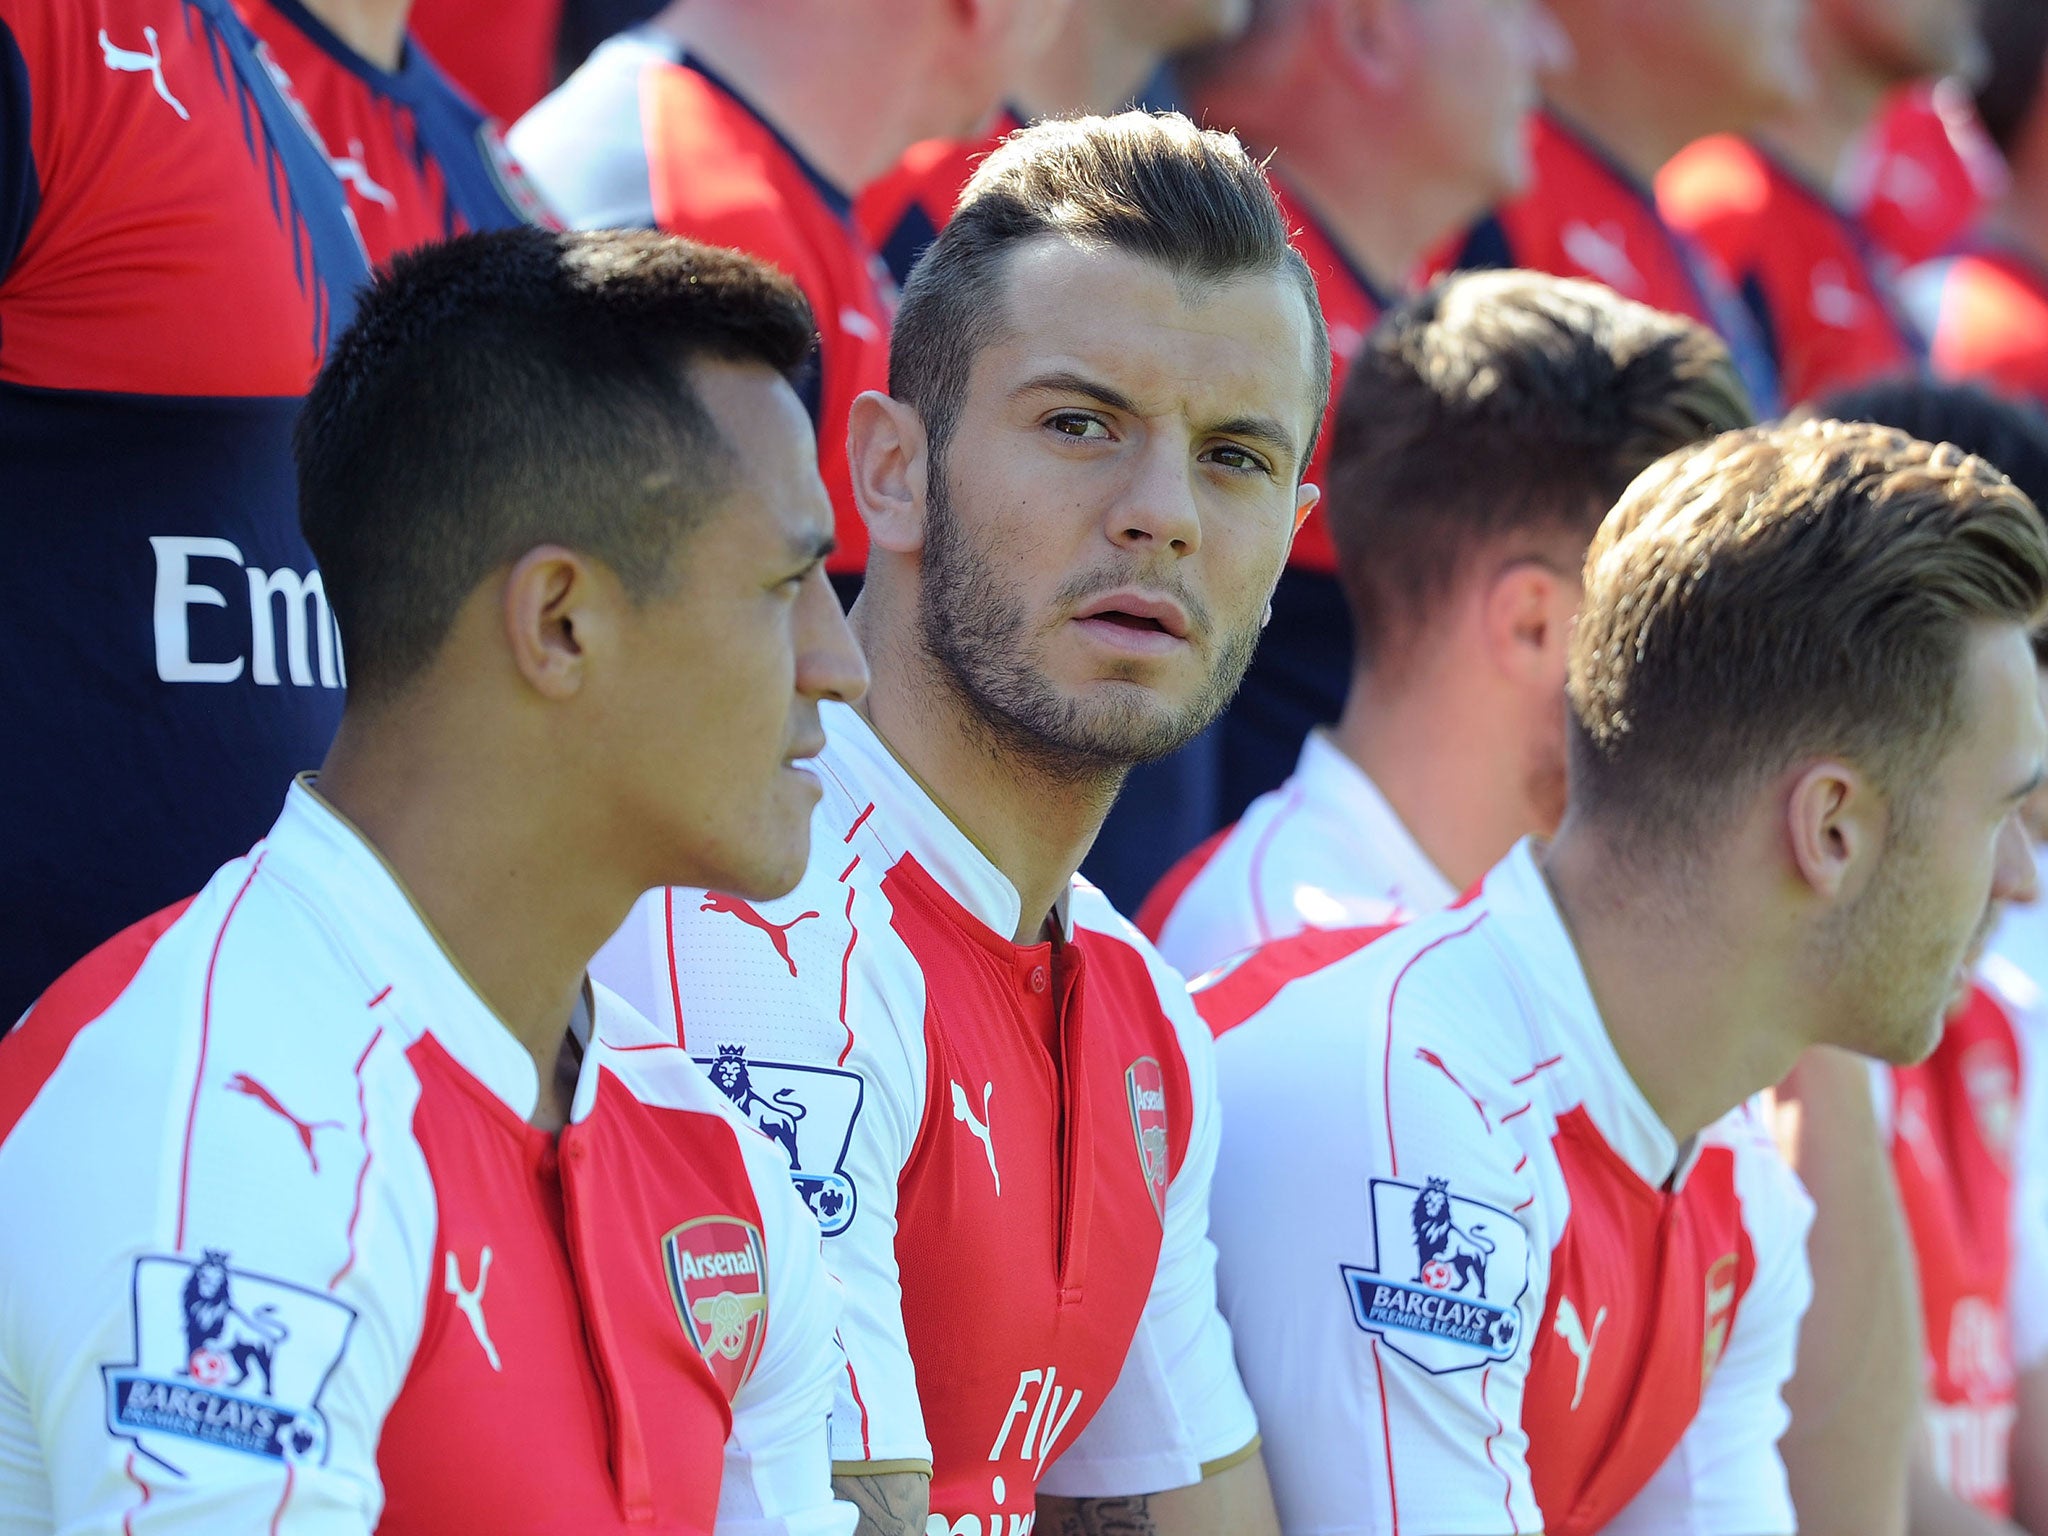 Jack Wilshere will not be available for Arsenal for at least another month